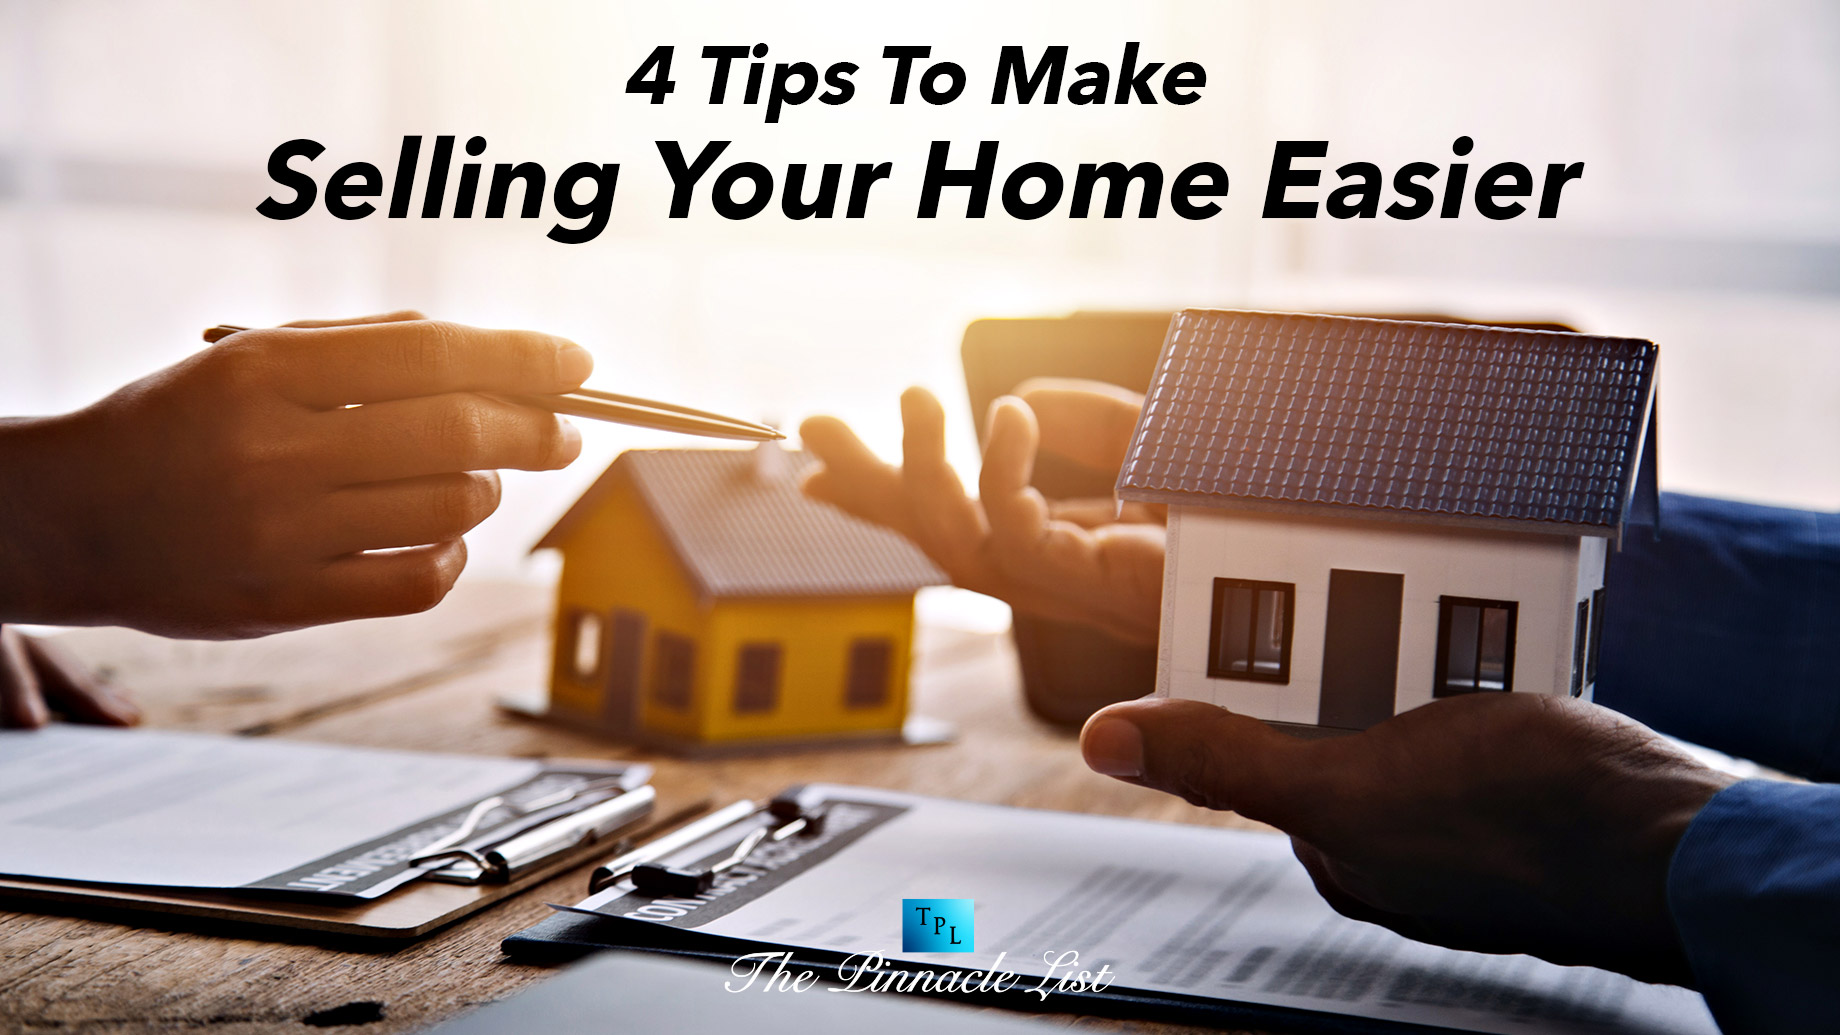 4 Tips To Make Selling Your Home Easier